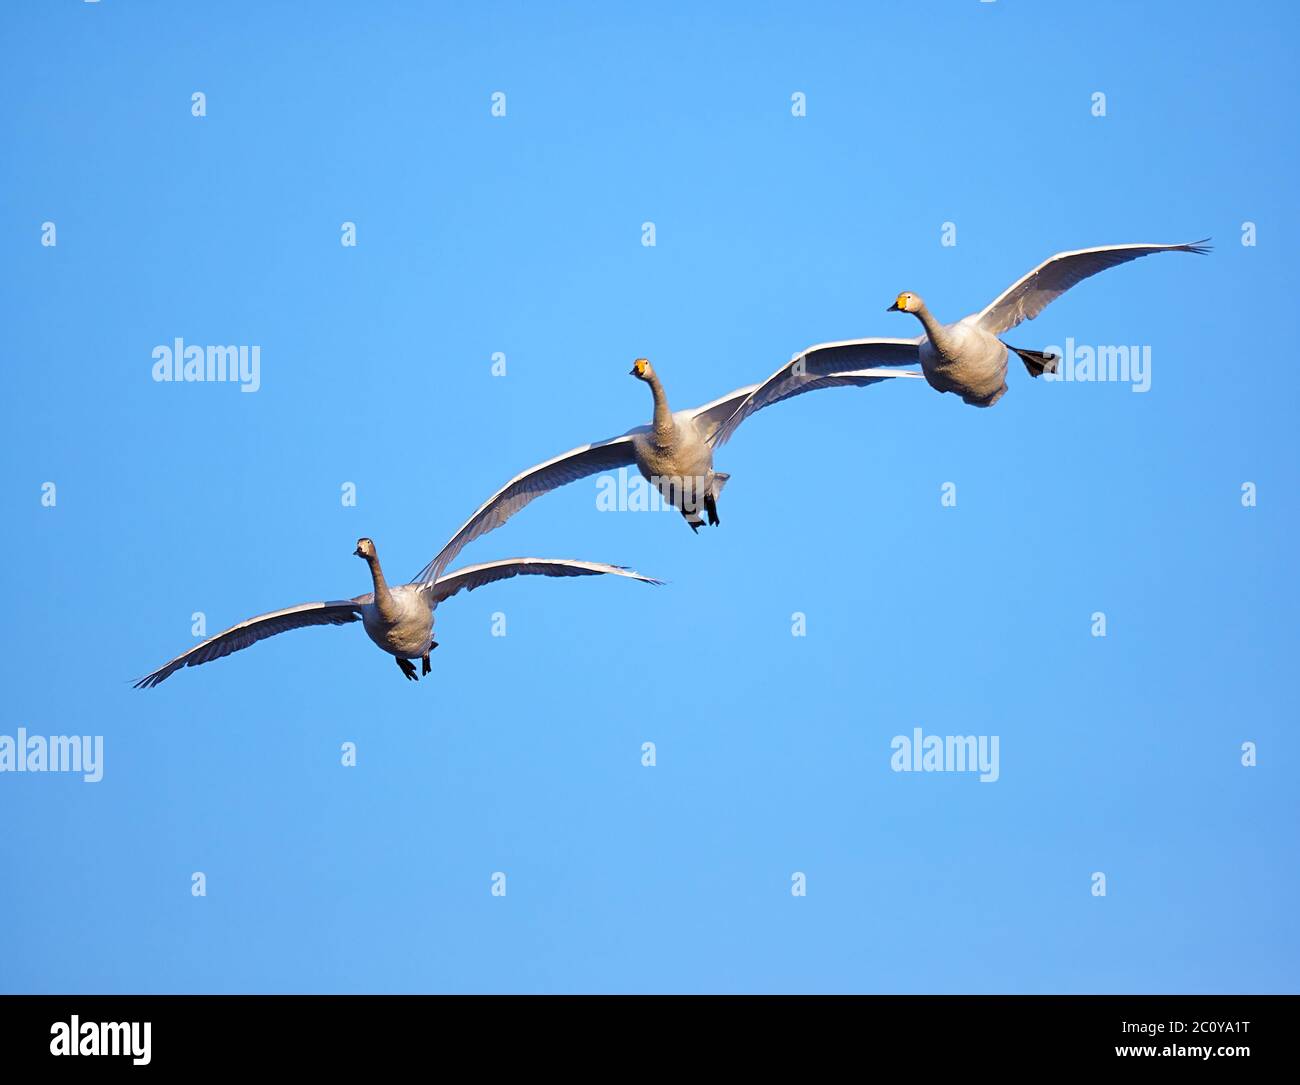 Flock of swans on blue sky background Stock Photo